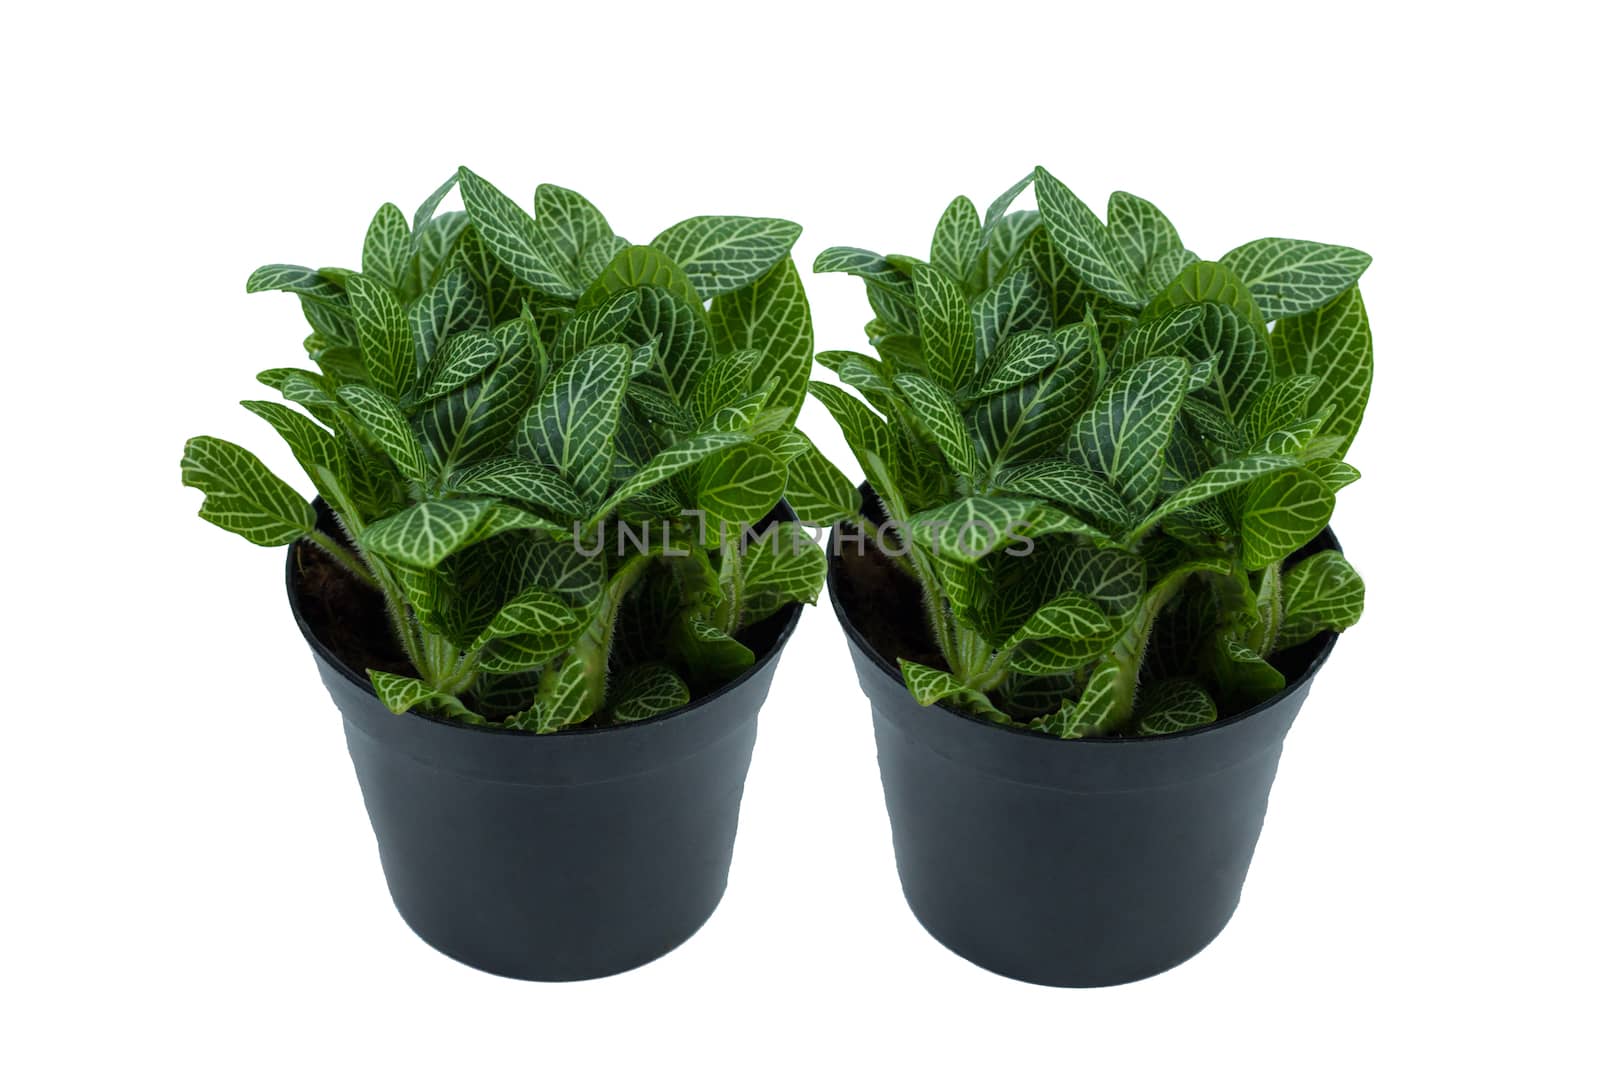 Little twin plant in a black pot. Isolated on white background. Space for text.